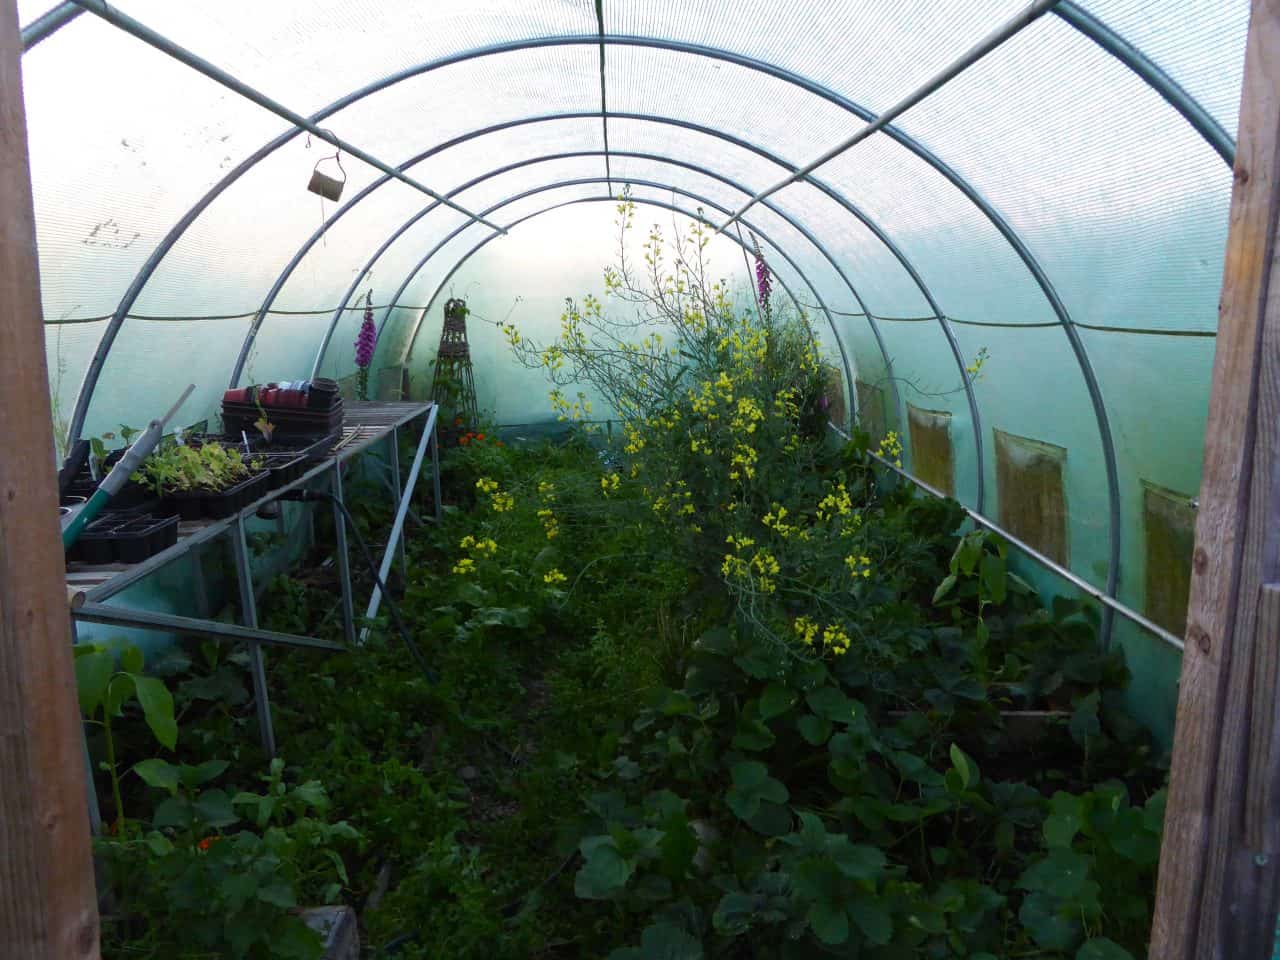 Polytunnel with green plnats